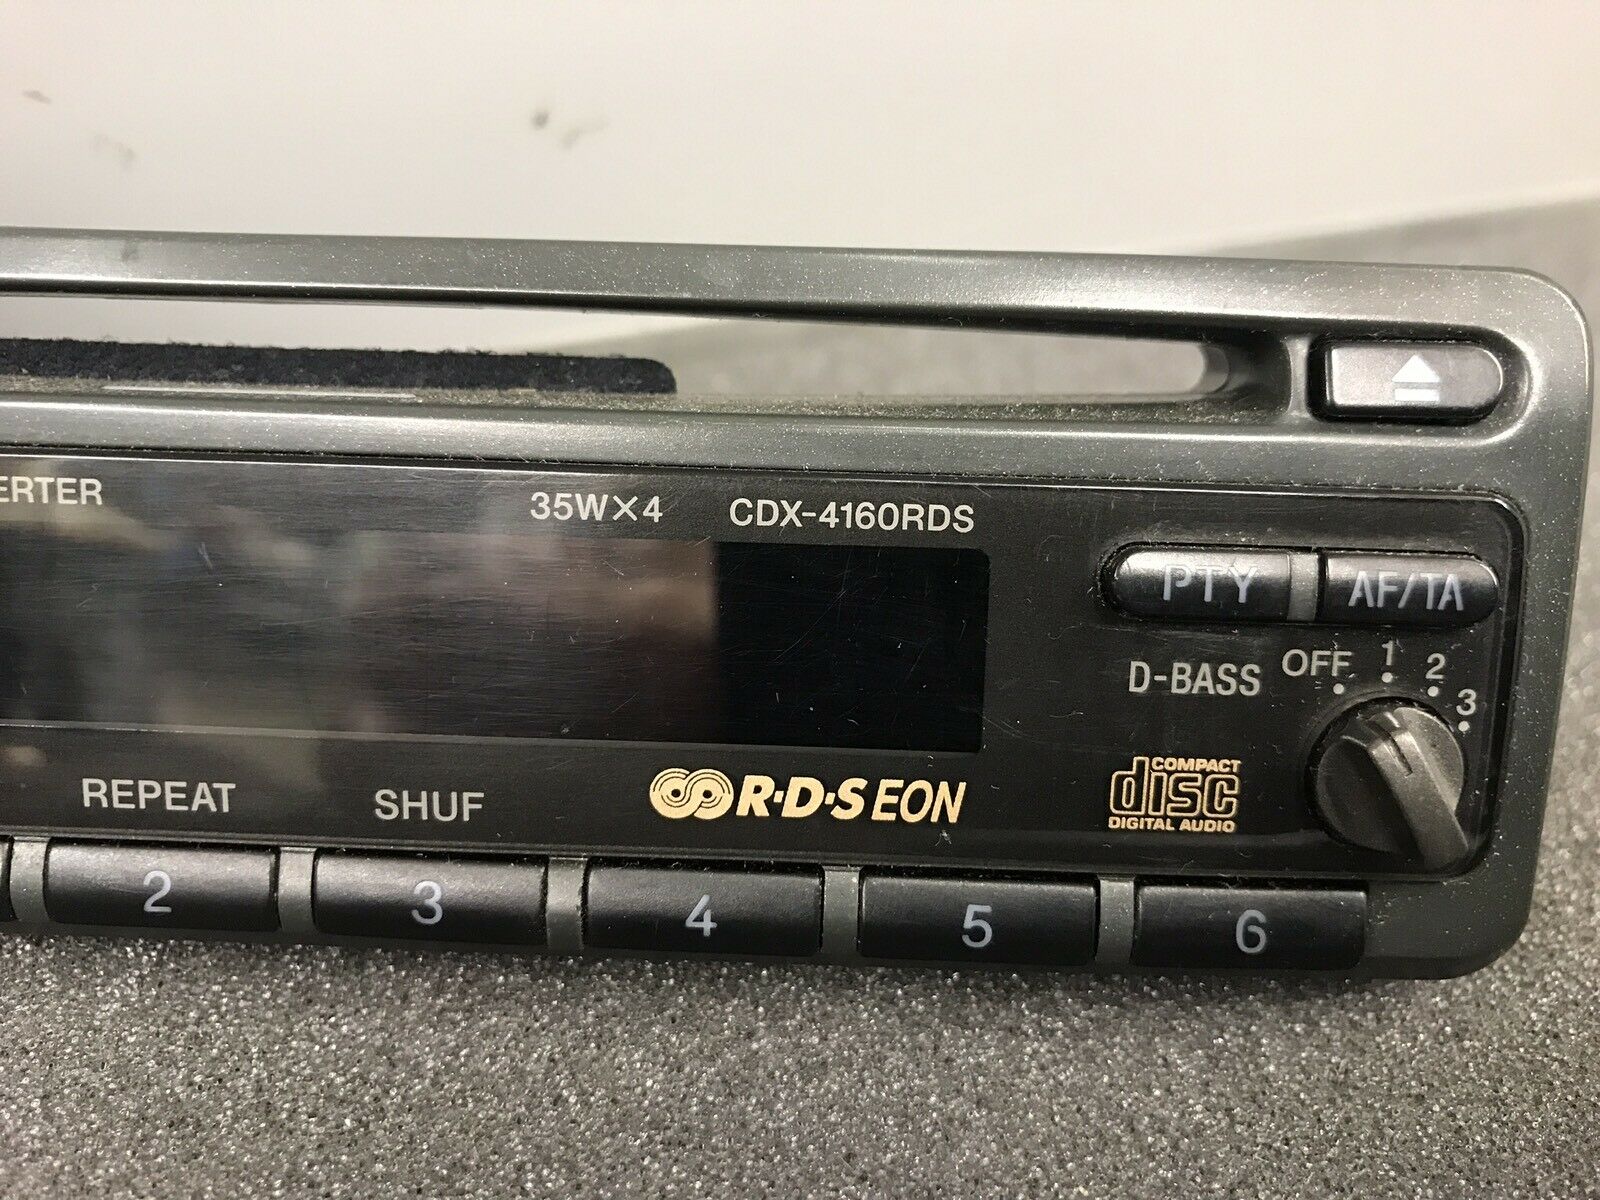 Sony Cdx-4160rds Car Radio Stereo Face Front Panel complete Cdx4160rds